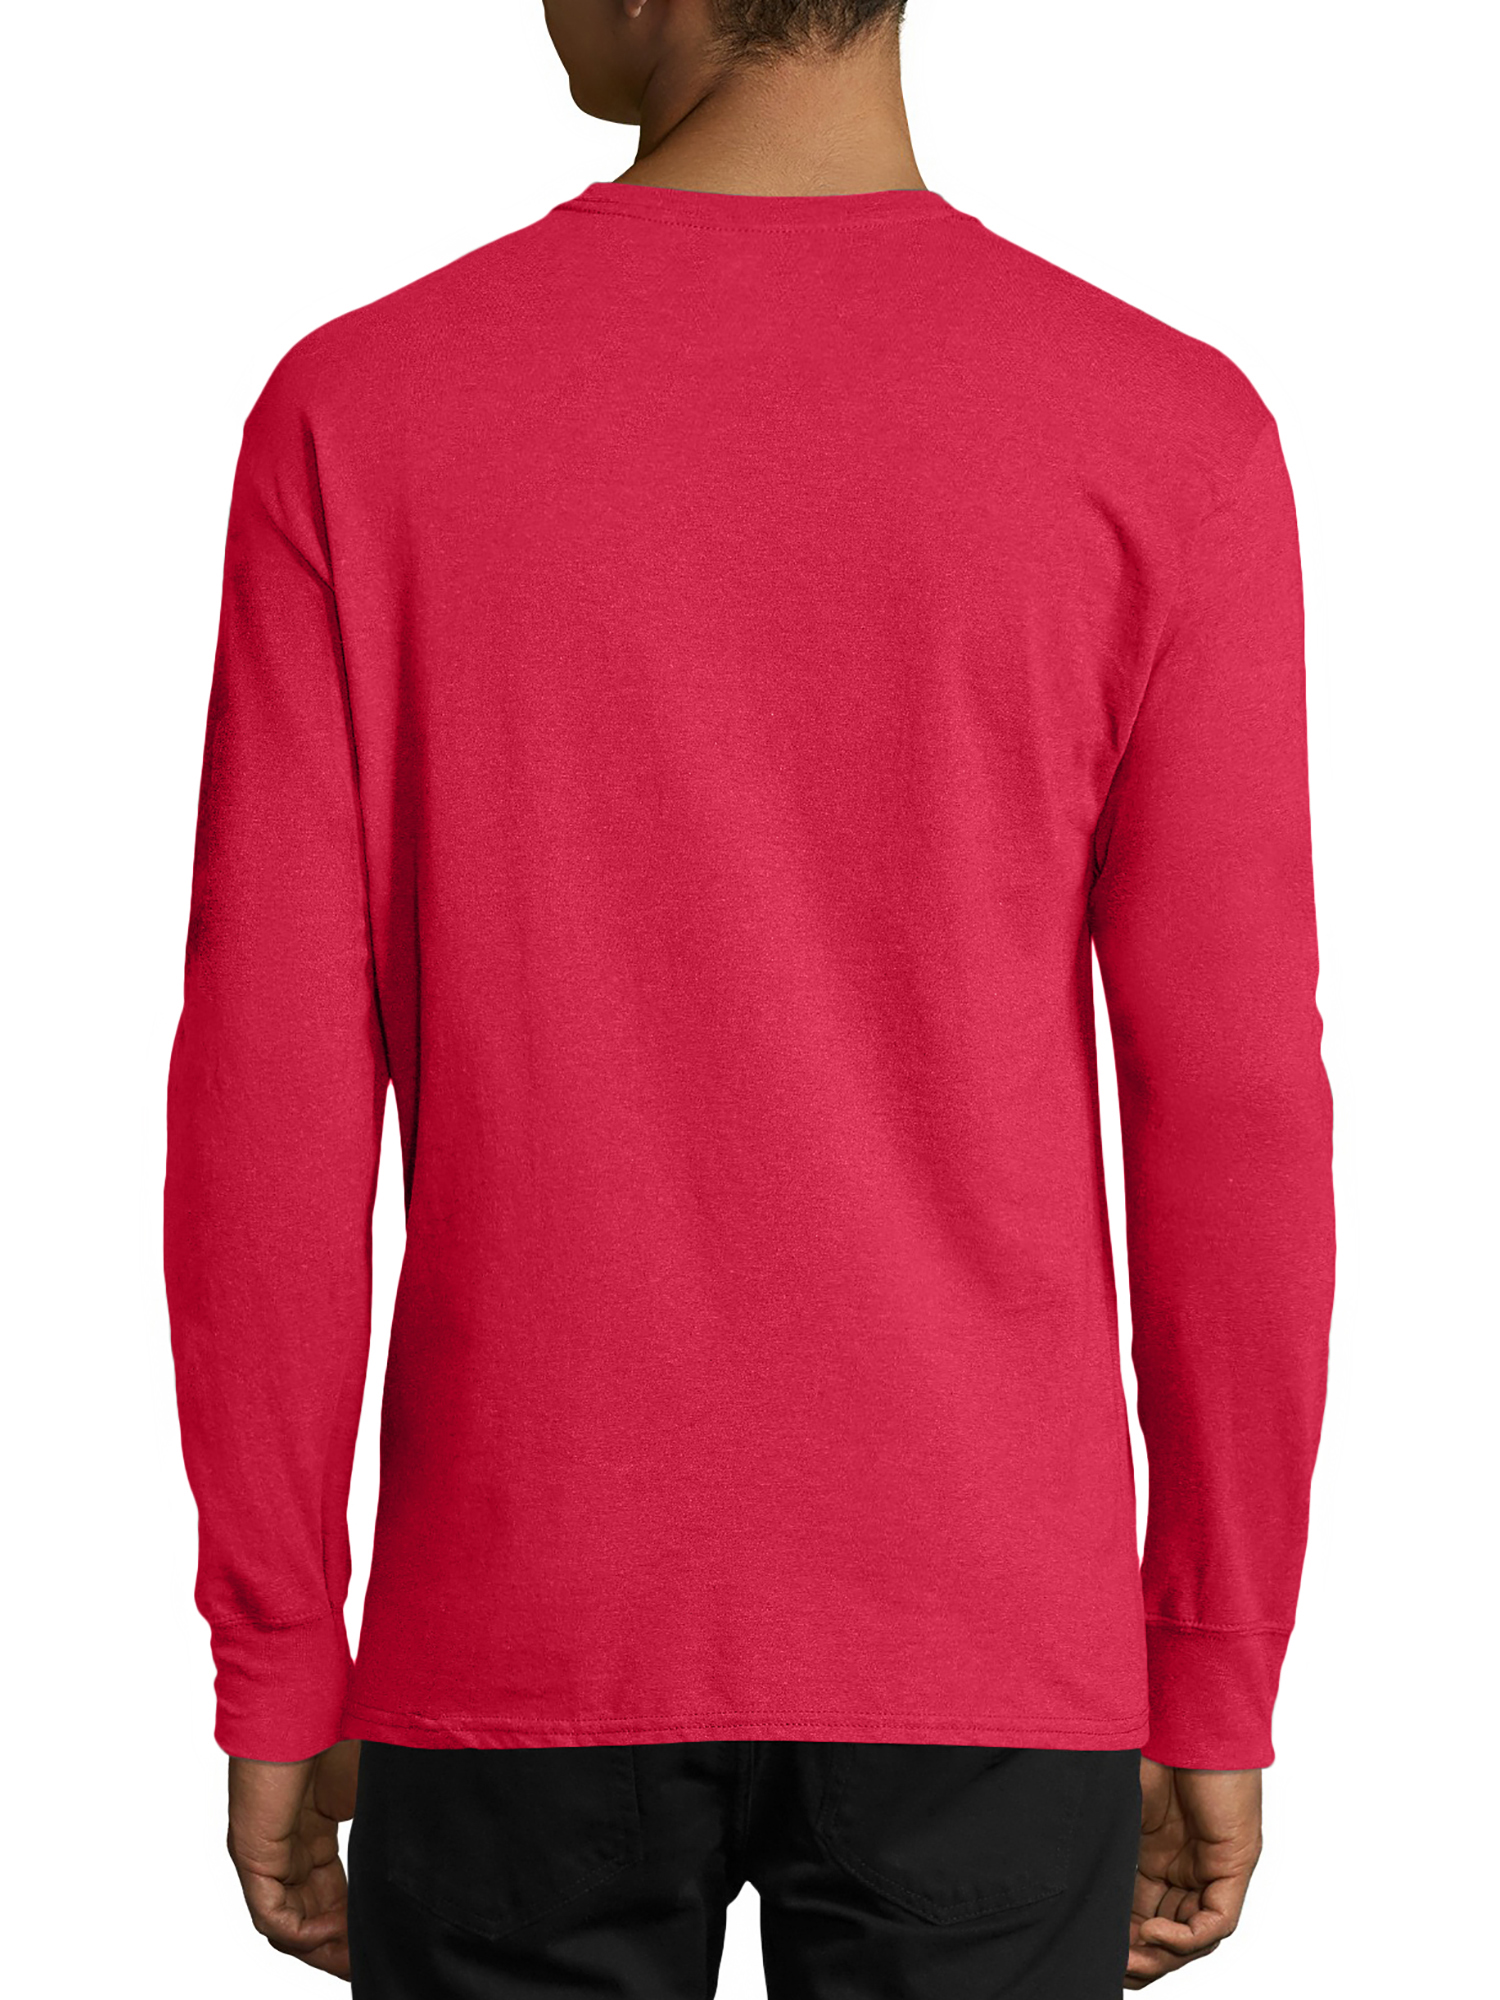 Hanes Men's and Big Men's X-Temp Lightweight Long Sleeve T-Shirt, Up To Size 3XL - image 2 of 5